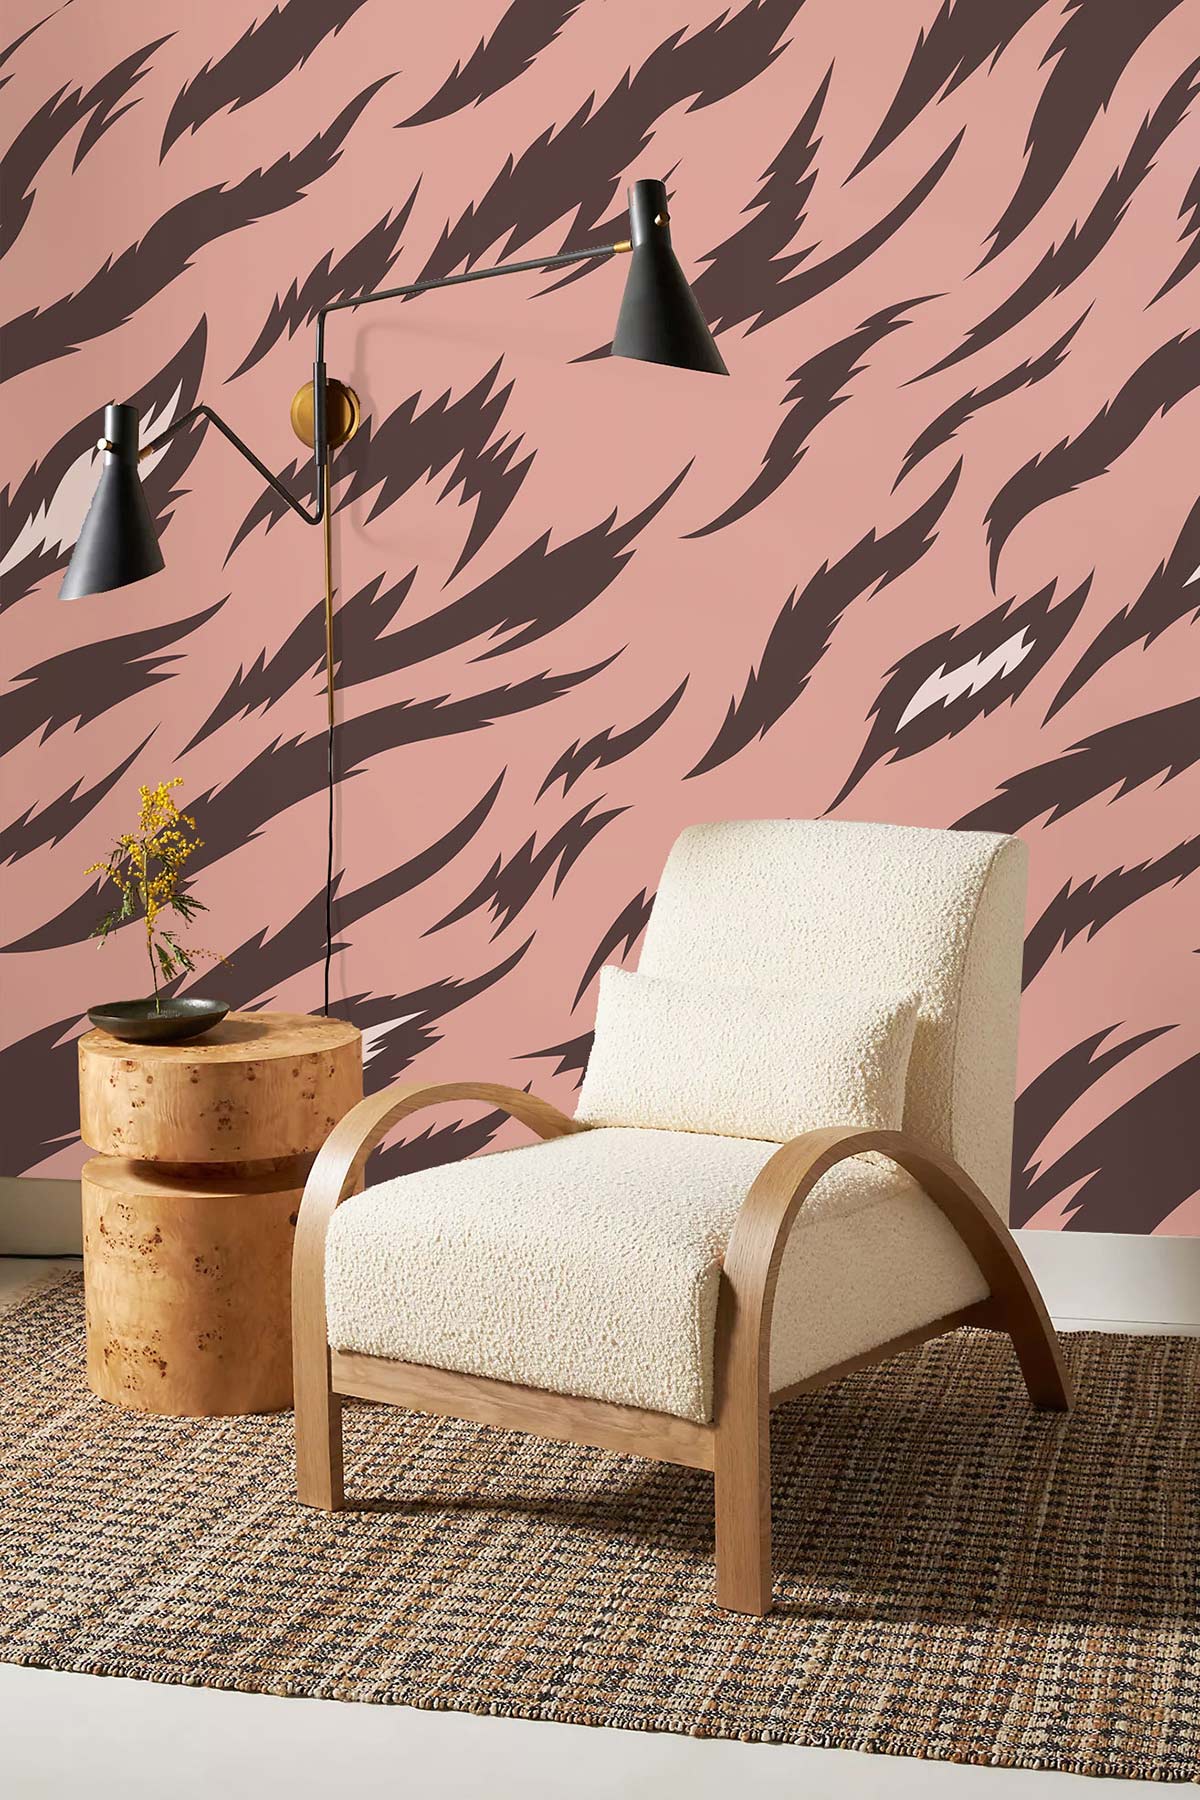 Wallpaper made of pink rough fur animal skin that may be used for decorating hallways